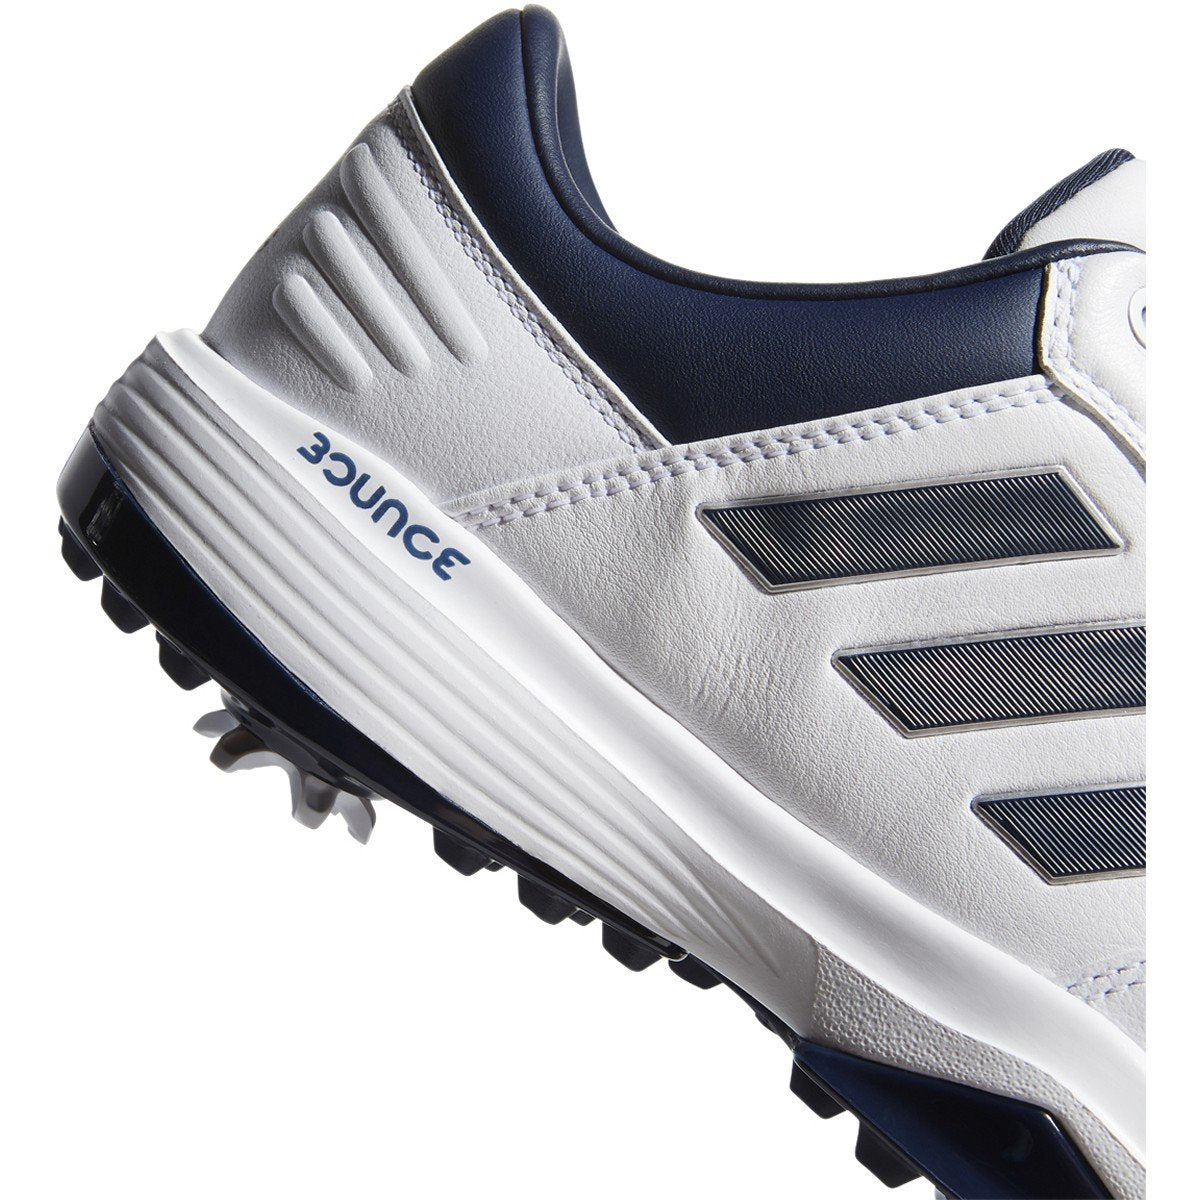 adidas 360 bounce 2 golf shoes review